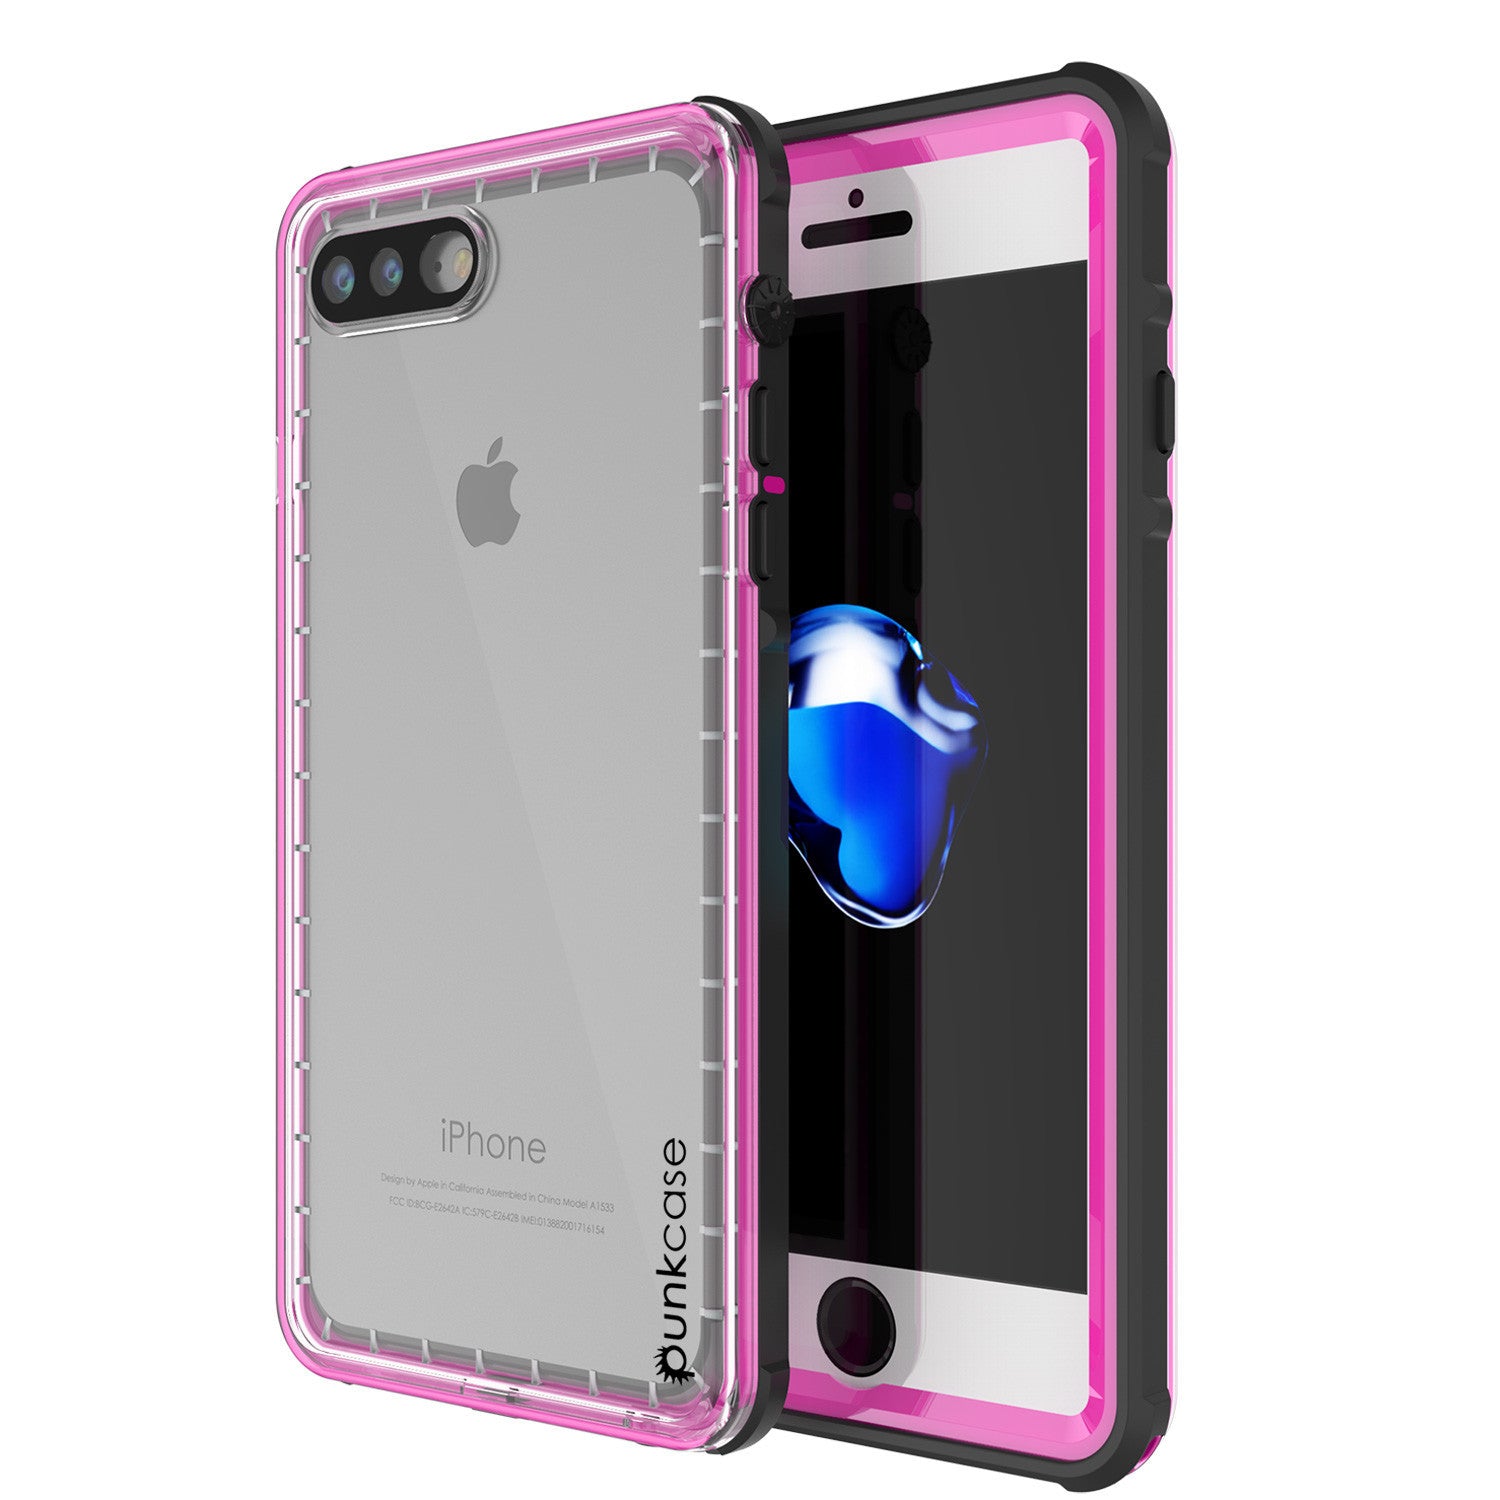 iPhone 7+ Plus Waterproof Case, PUNKcase CRYSTAL Pink W/ Attached Screen Protector  | Warranty (Color in image: pink)